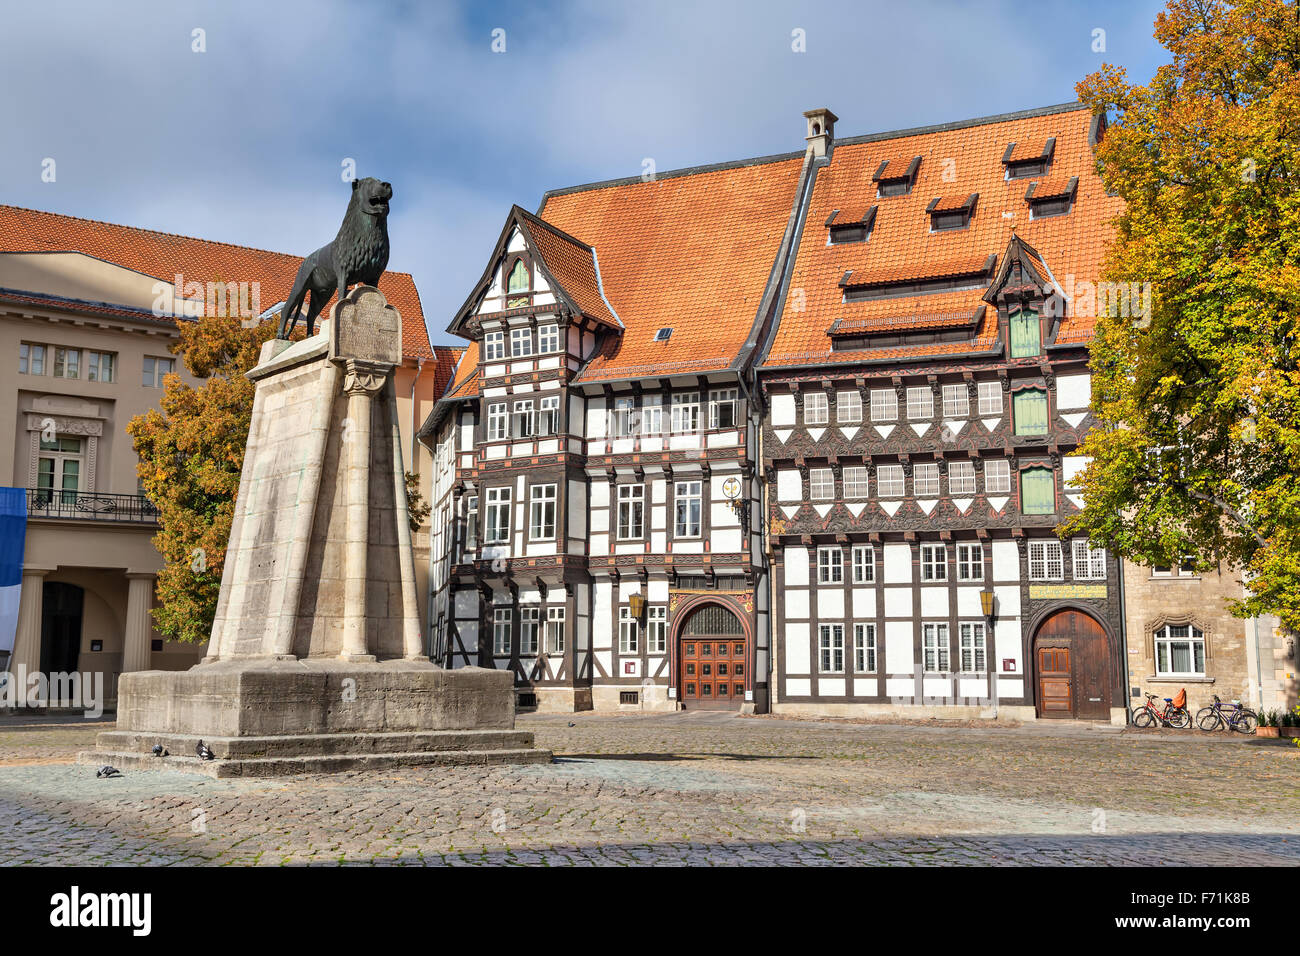 Statue of Leon and old half-timbered building on Burgplatz square in Braunschweig, Germany Stock Photo